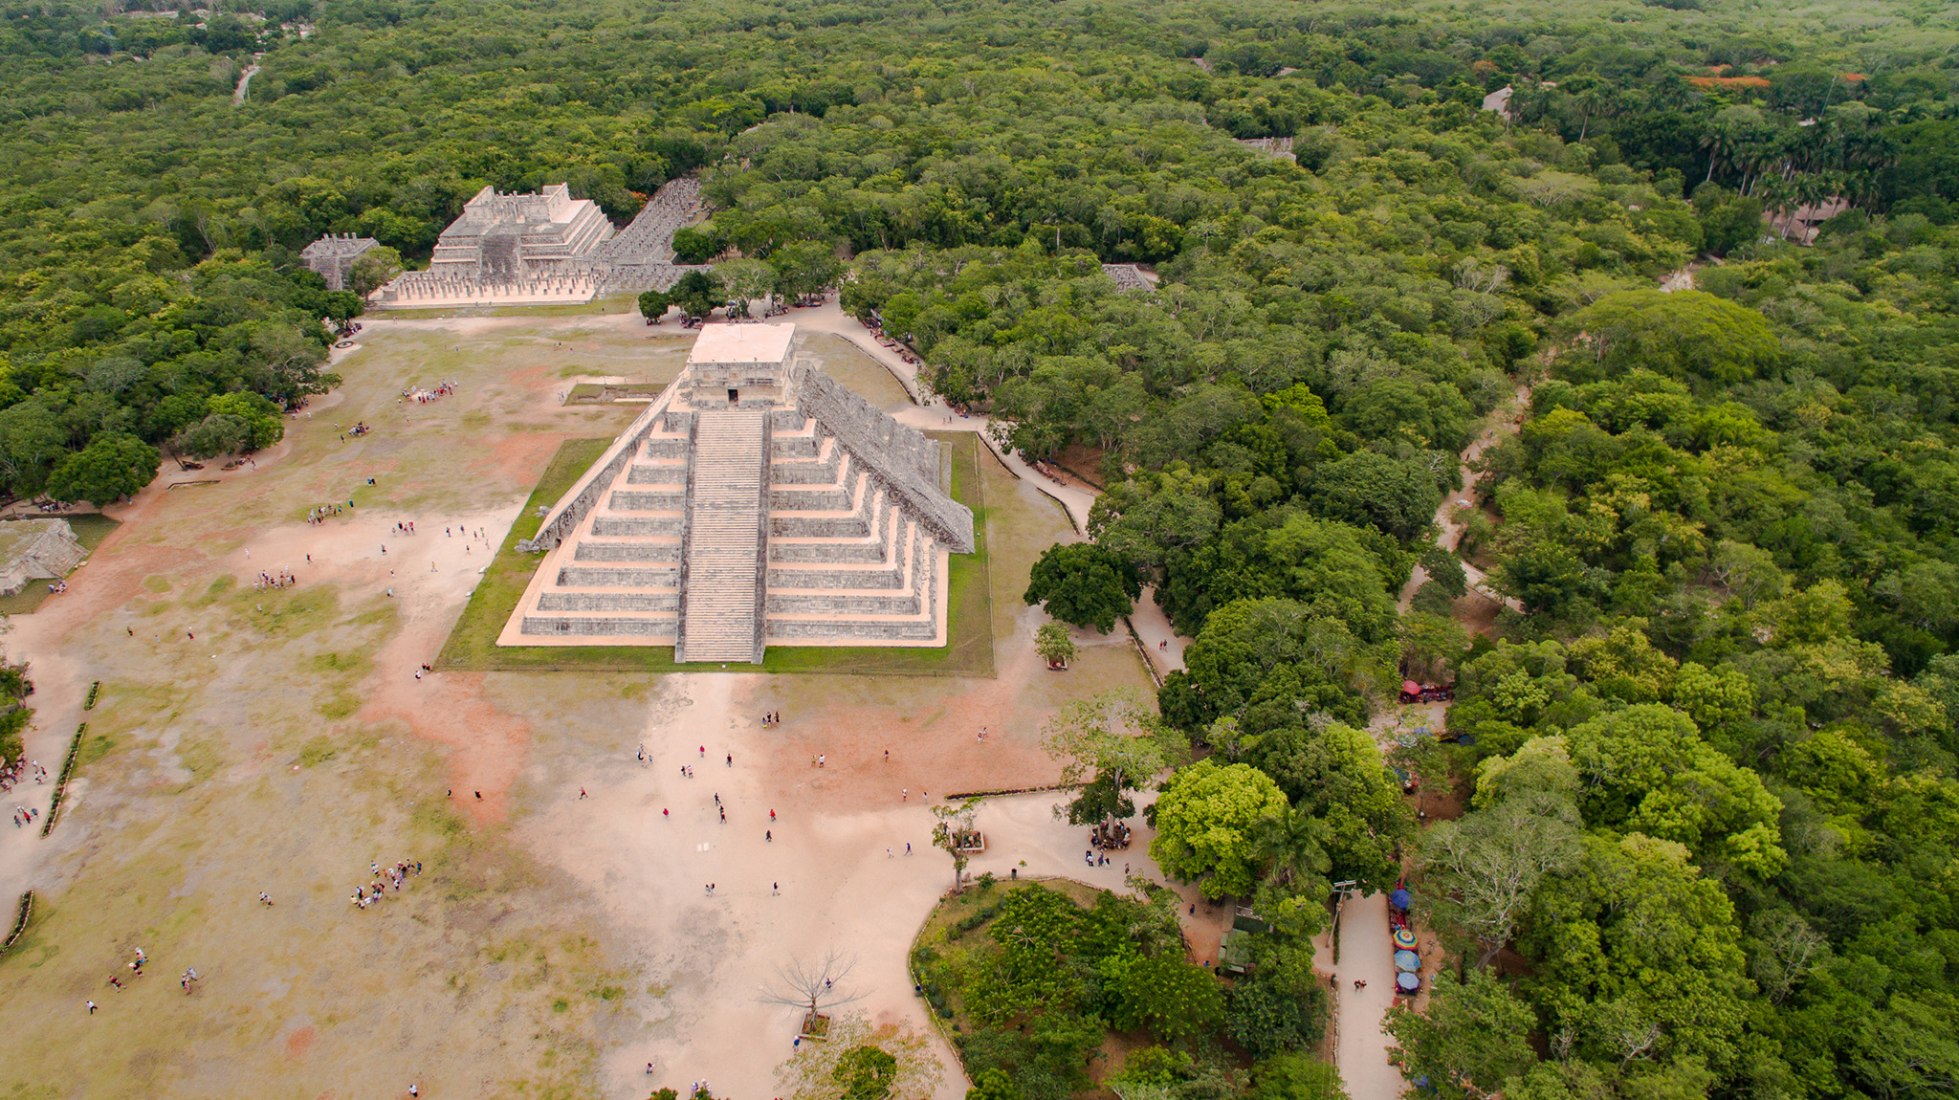 Aerial view of the buildings of Chichen Itza. UNESCO World Heritage Site. In 2007, Chichen Itza's El Castillo was named one of the New Seven Wonders.